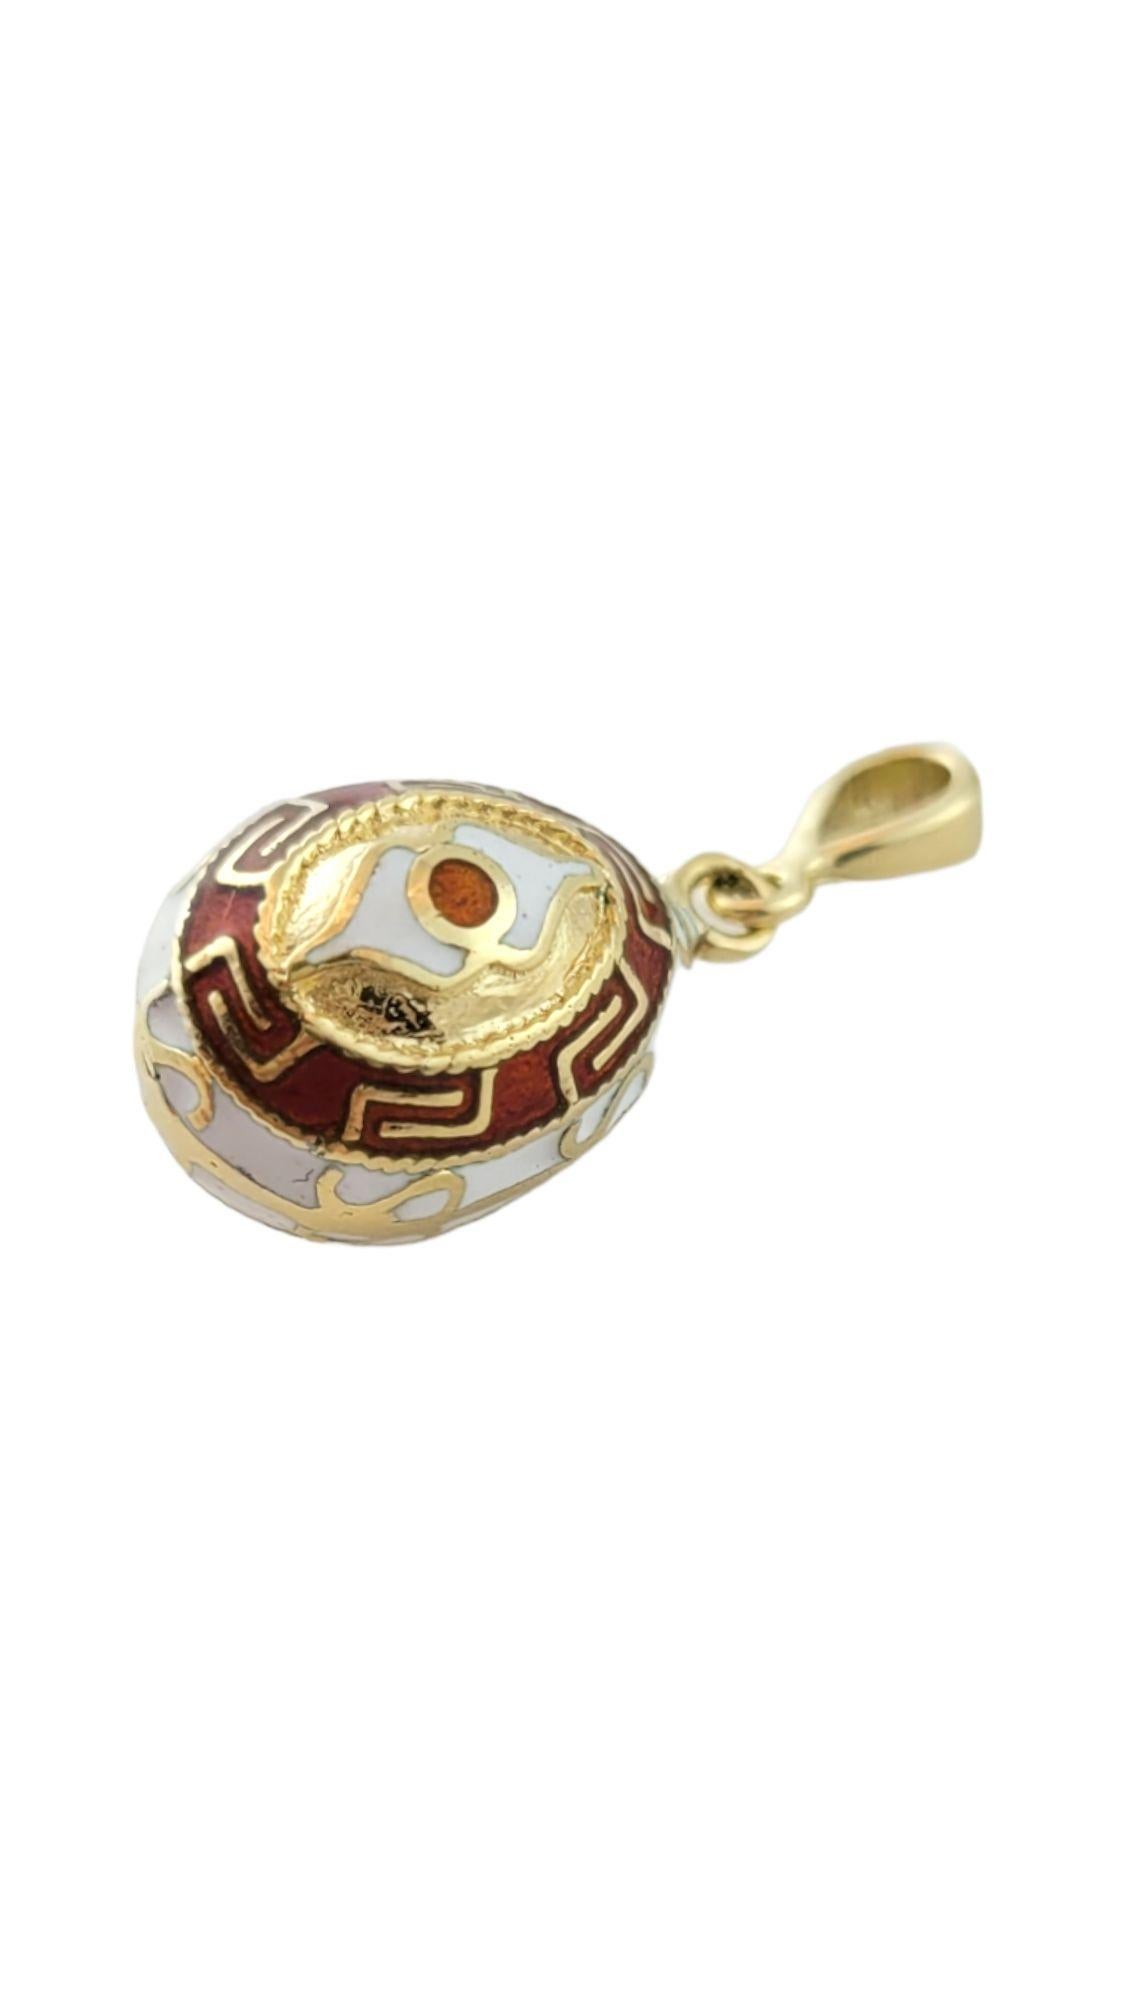 This adorable 14K yellow gold egg charm is decorated in gorgeous patterns using orange and white enamel!

Size: 17.3mm X 10.7mm X 10.7mm

Length w/ bail: 24.9mm

Weight: 3.4 g/ 2.1 dwt

Hallmark: S&M 14K

Very good condition, professionally